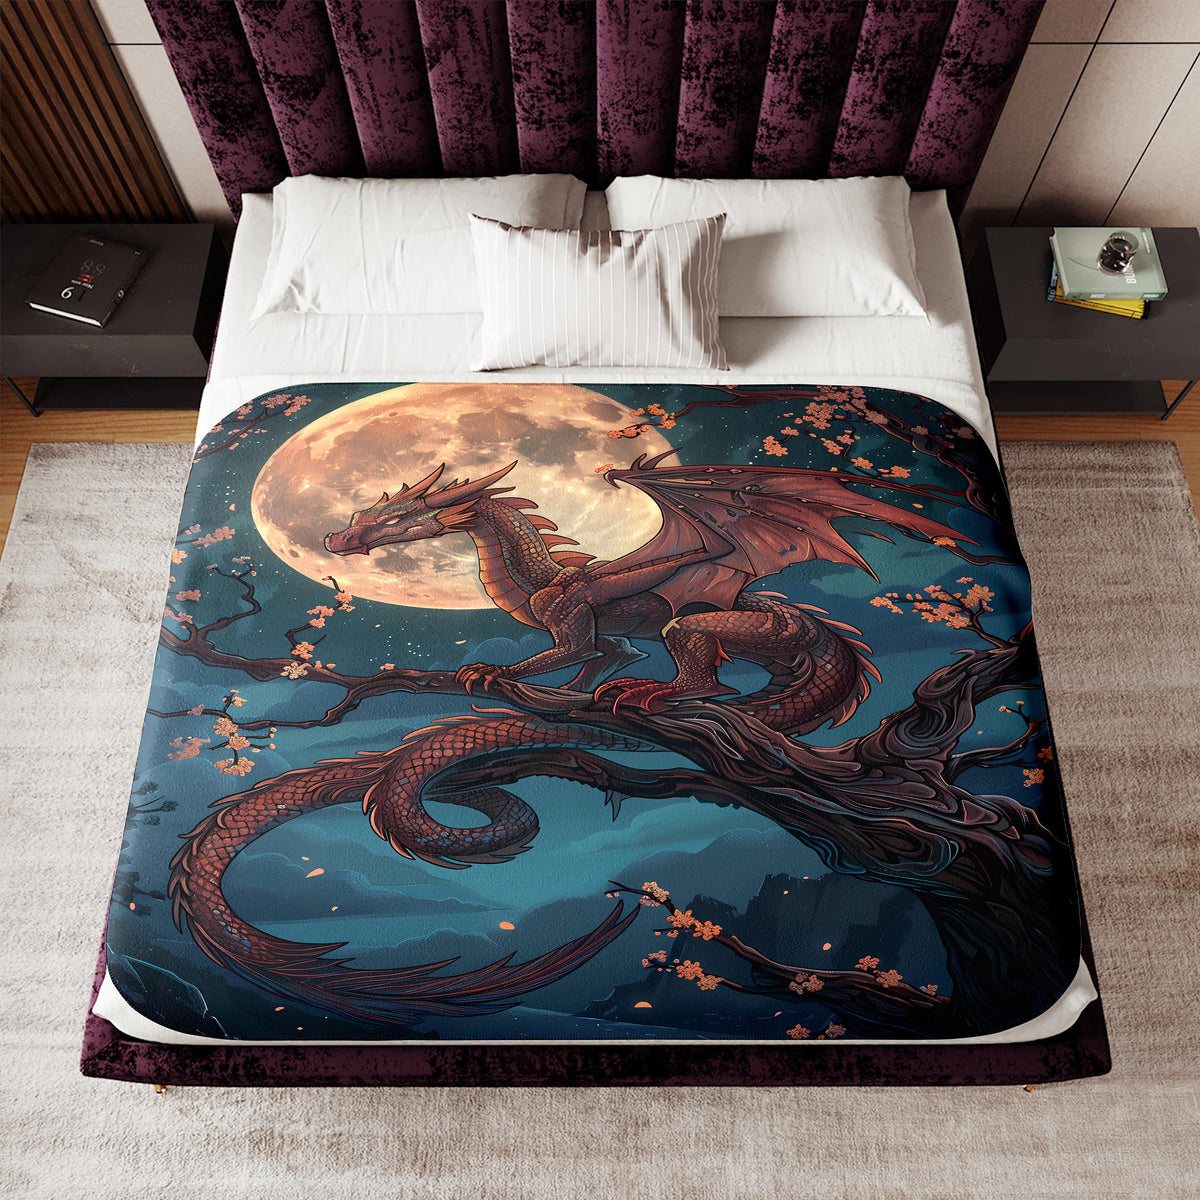 a bed with a dragon on it with a full moon in the background